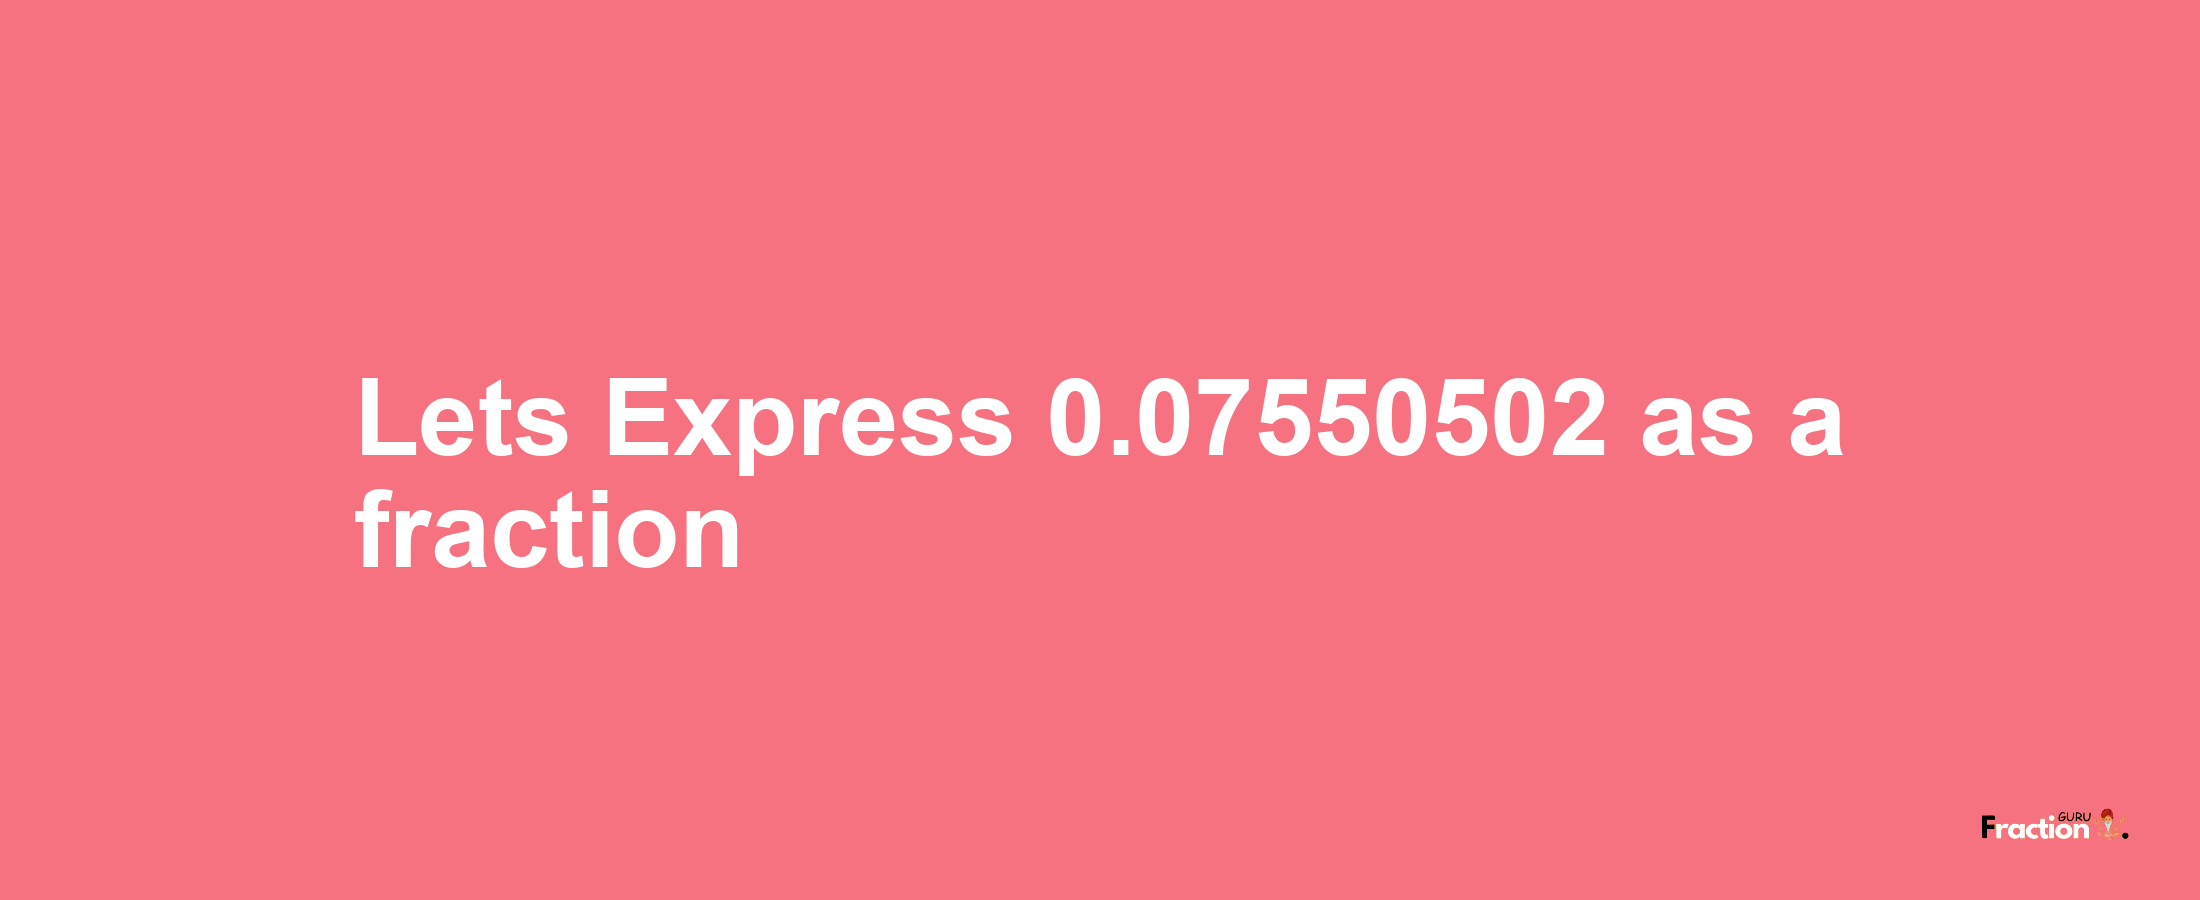 Lets Express 0.07550502 as afraction